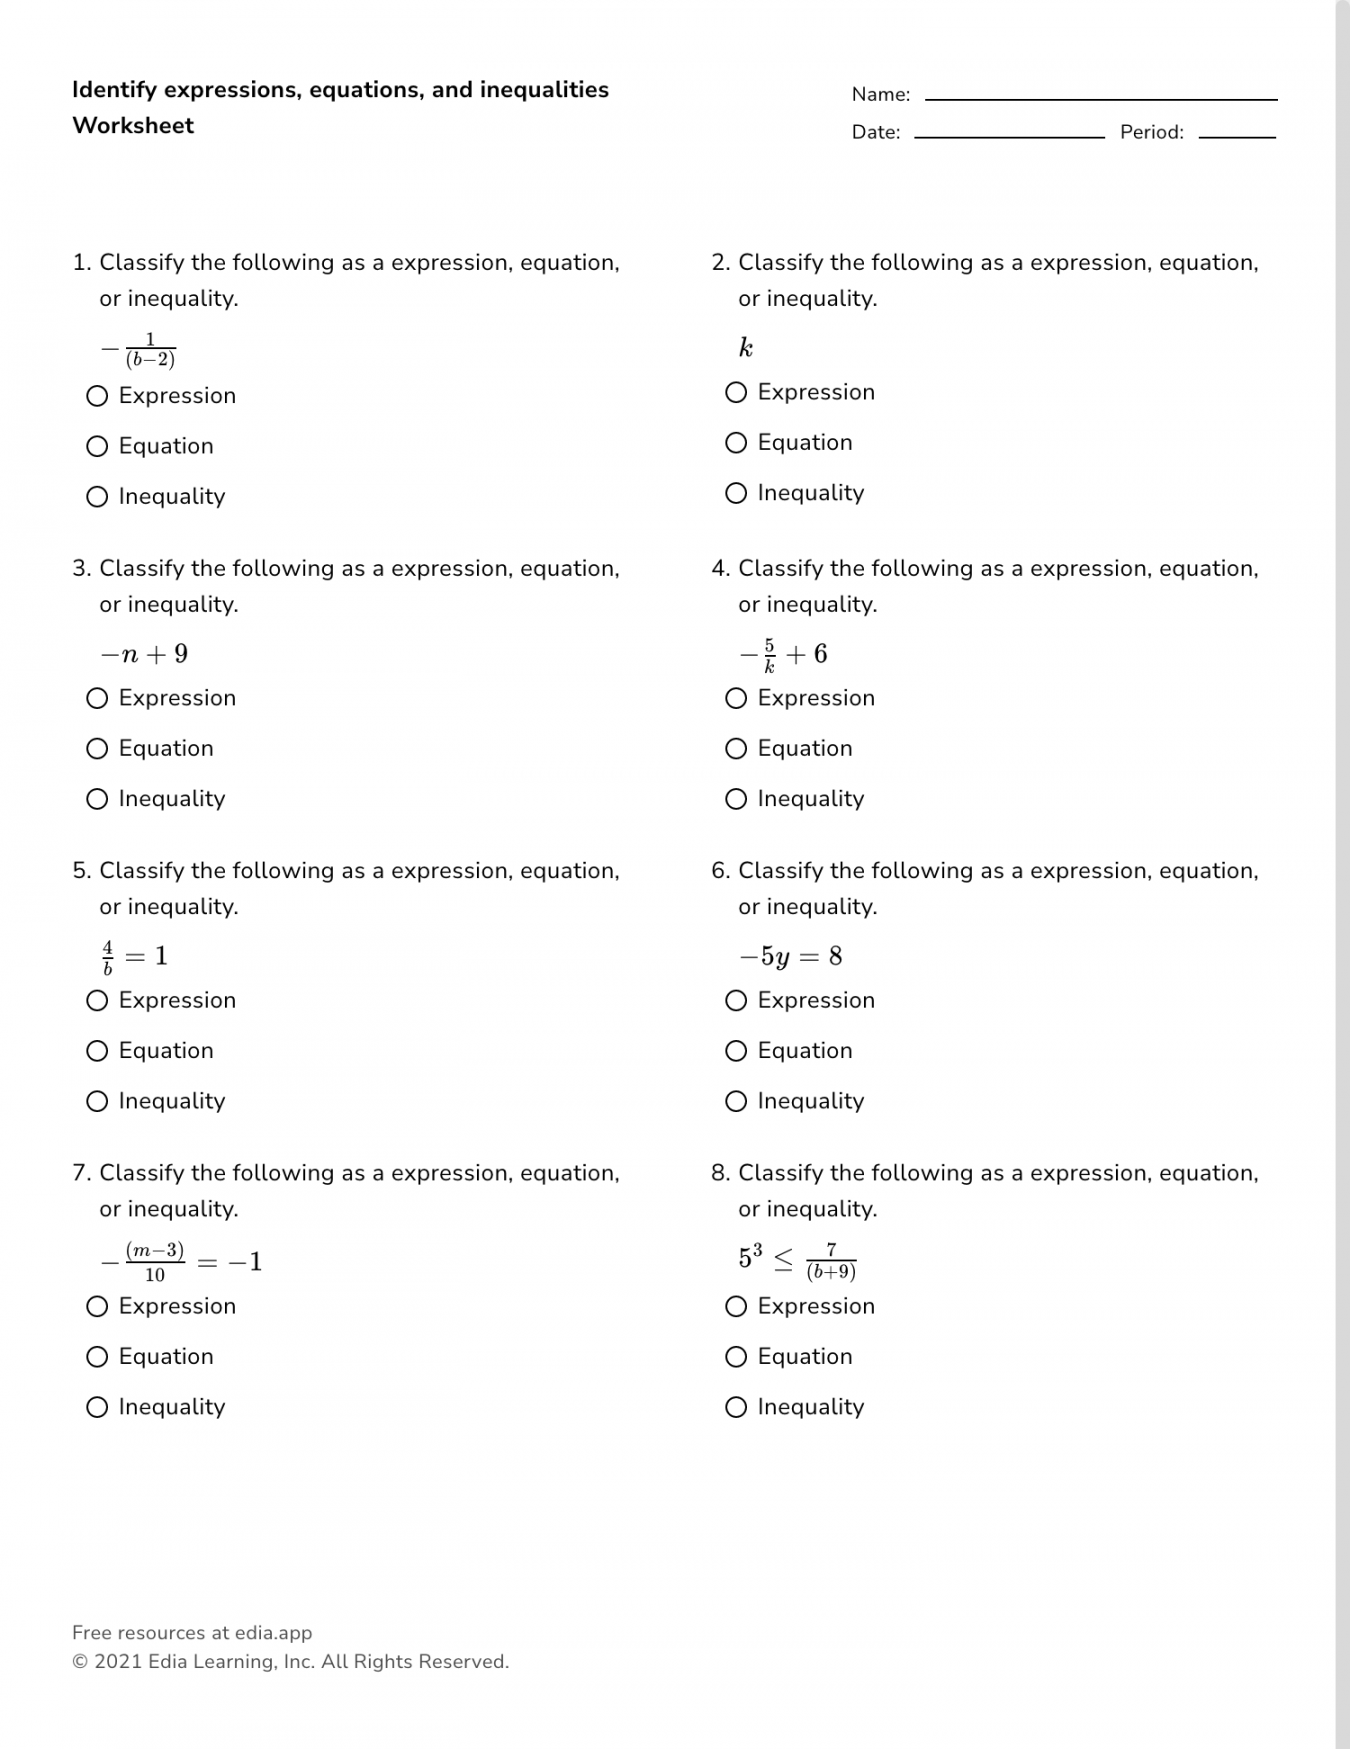 Identify Expressions, Equations, And Inequalities - Worksheet